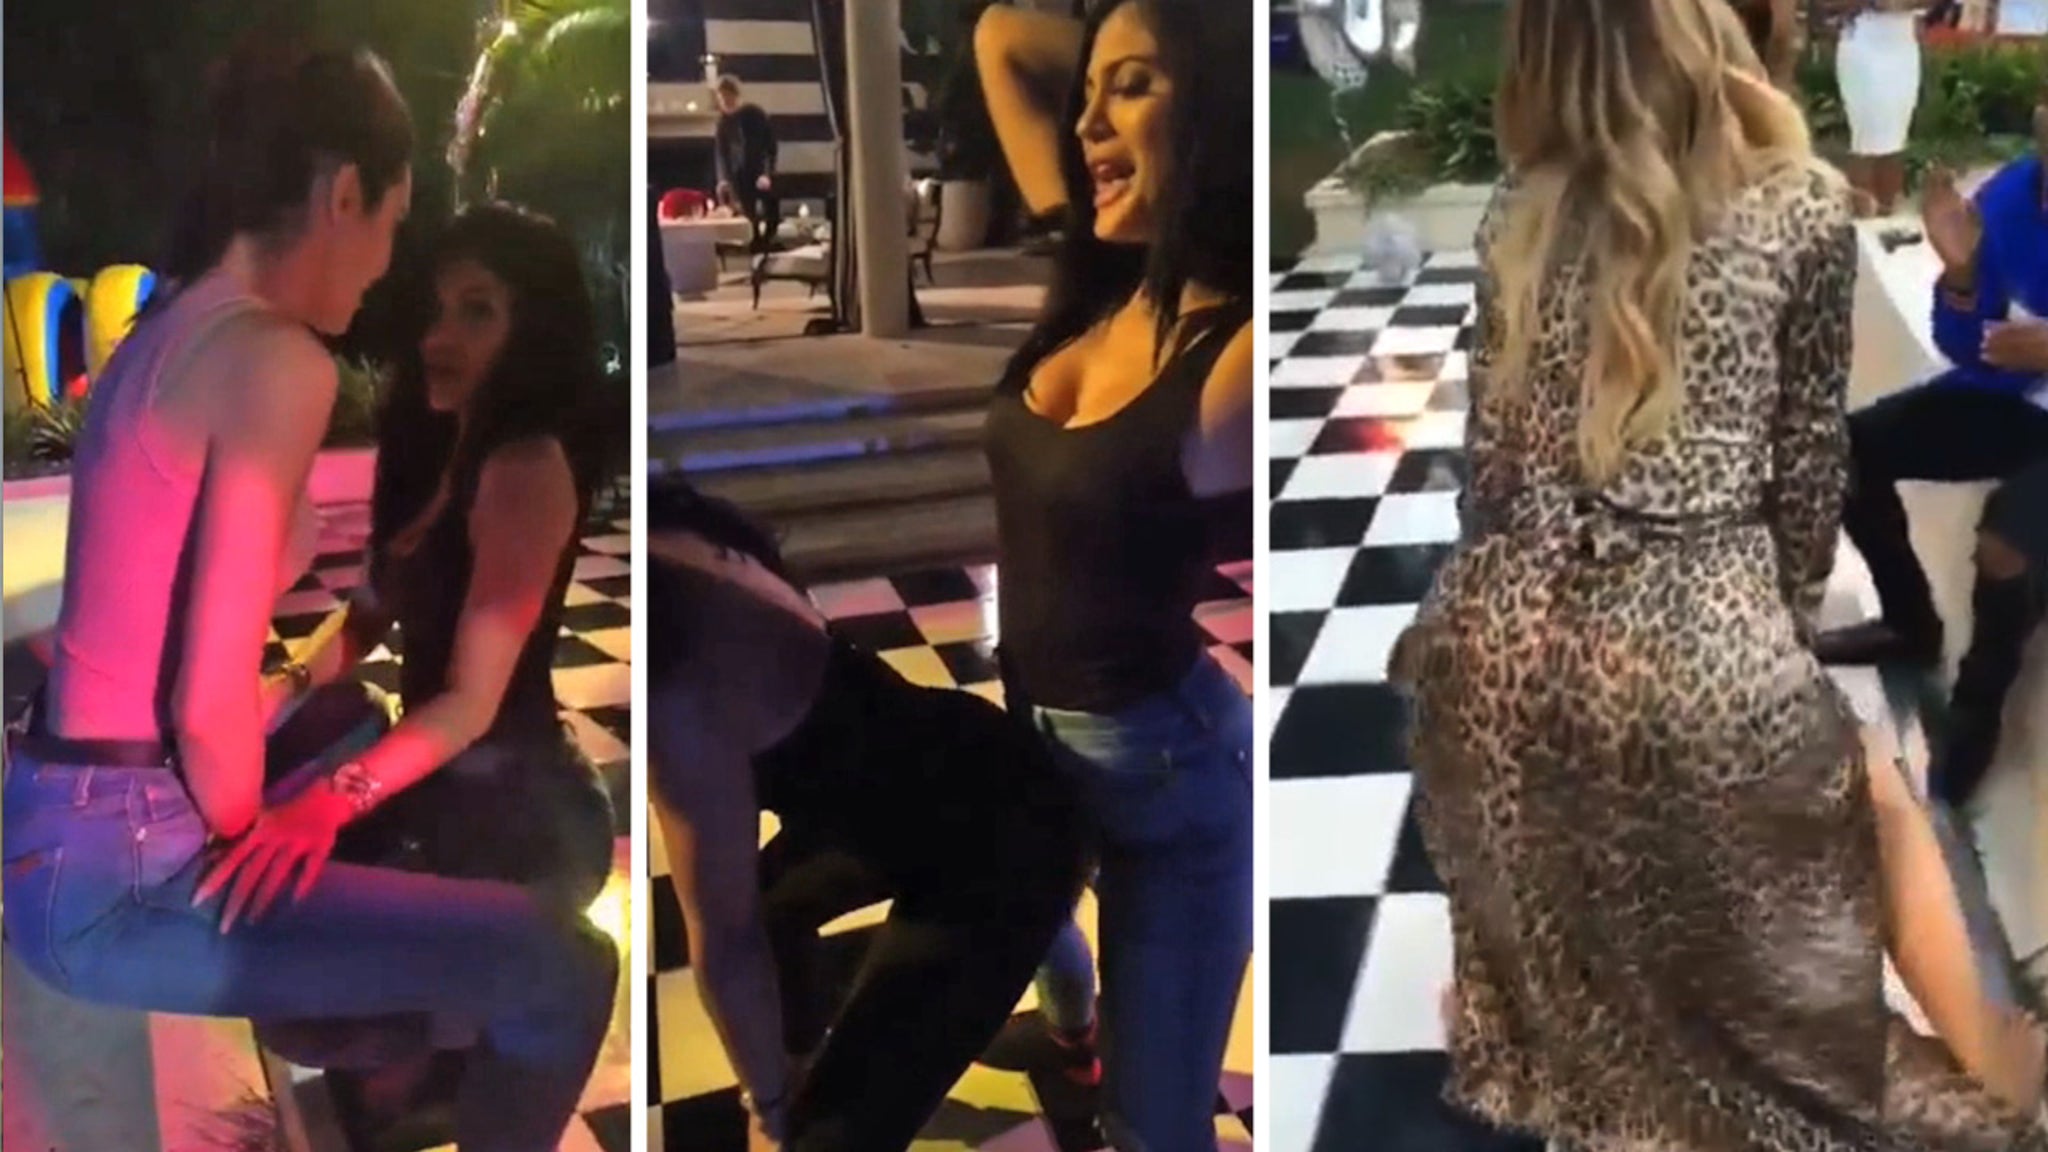 Kylie Jenner Khloe S Twerking Steals The Show At Graduation Party Video